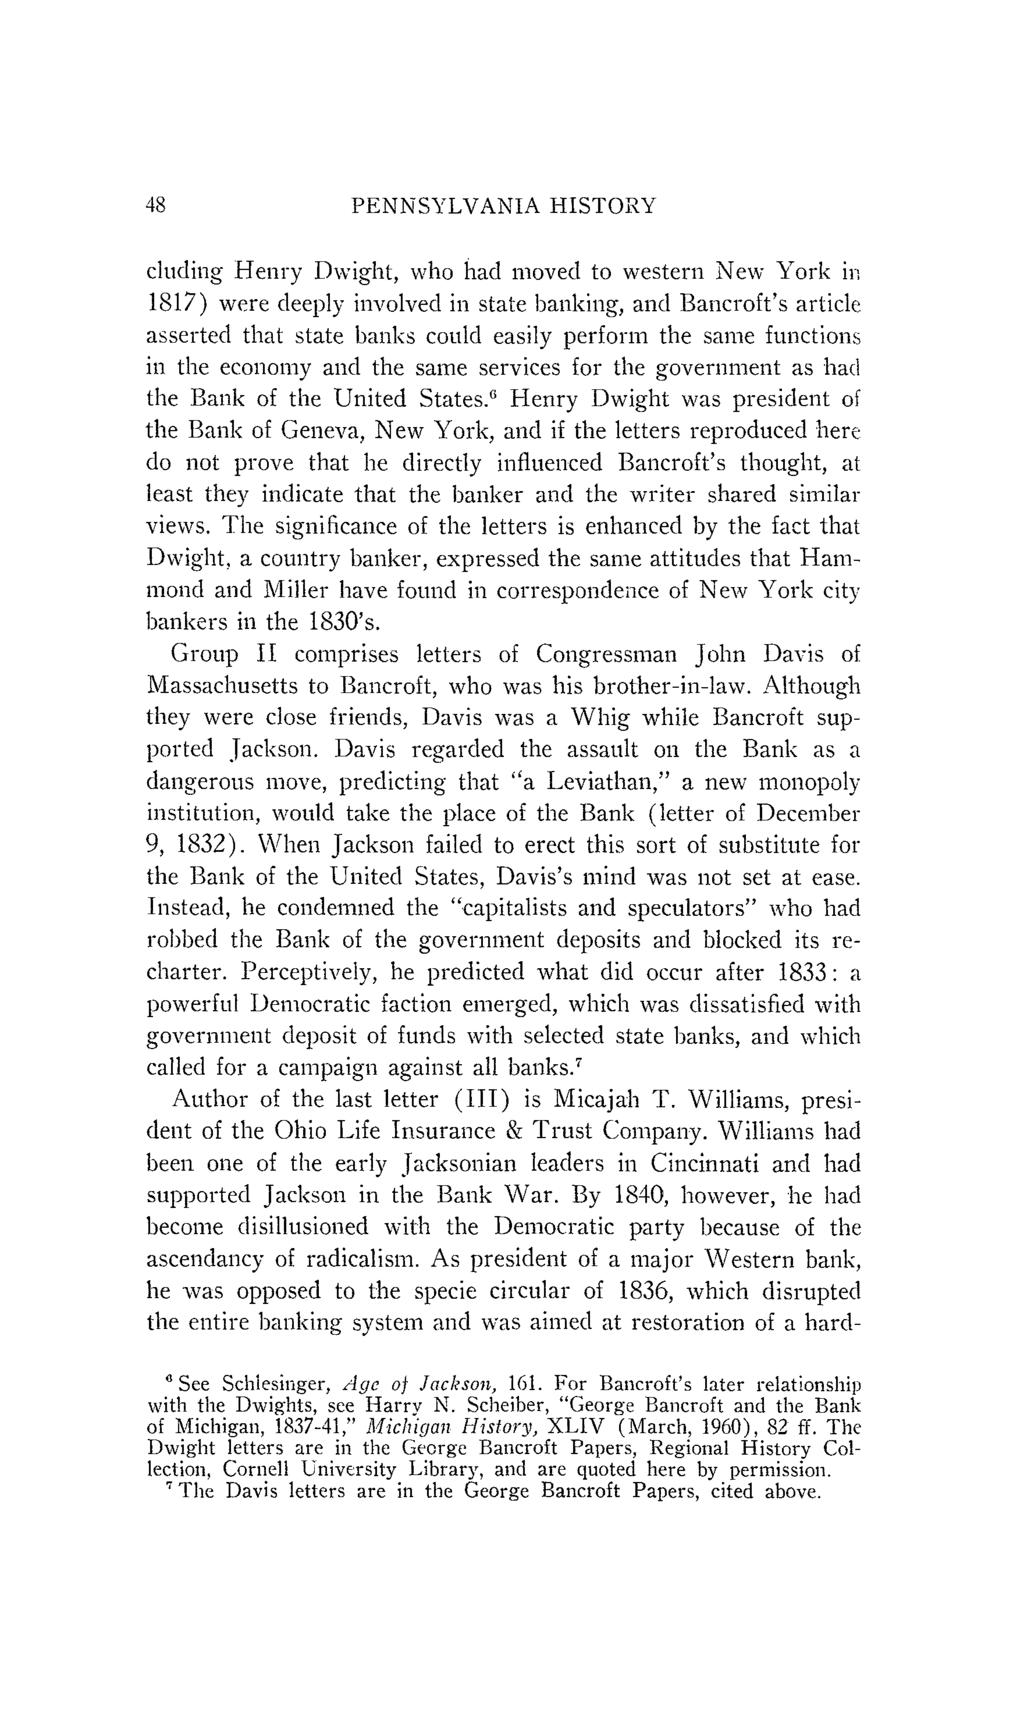 48 PENNSYLVANIA HISTORY cluding Henry Dwight, who had moved to western New York in 1817) were deeply involved in state banking, and Bancroft's article asserted that state banks could easily perform